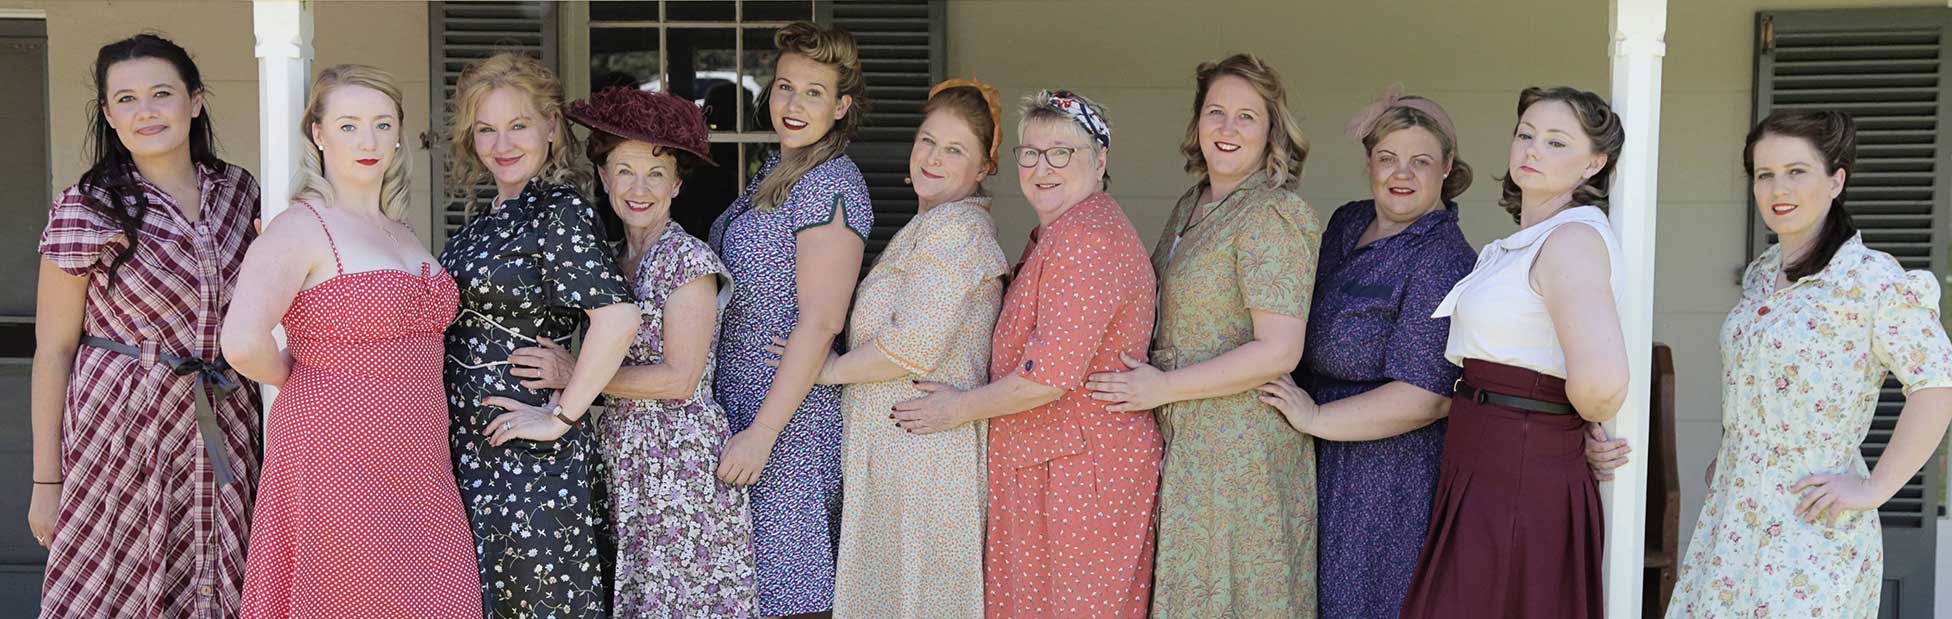 Women in a line all wearing 40's style dresses